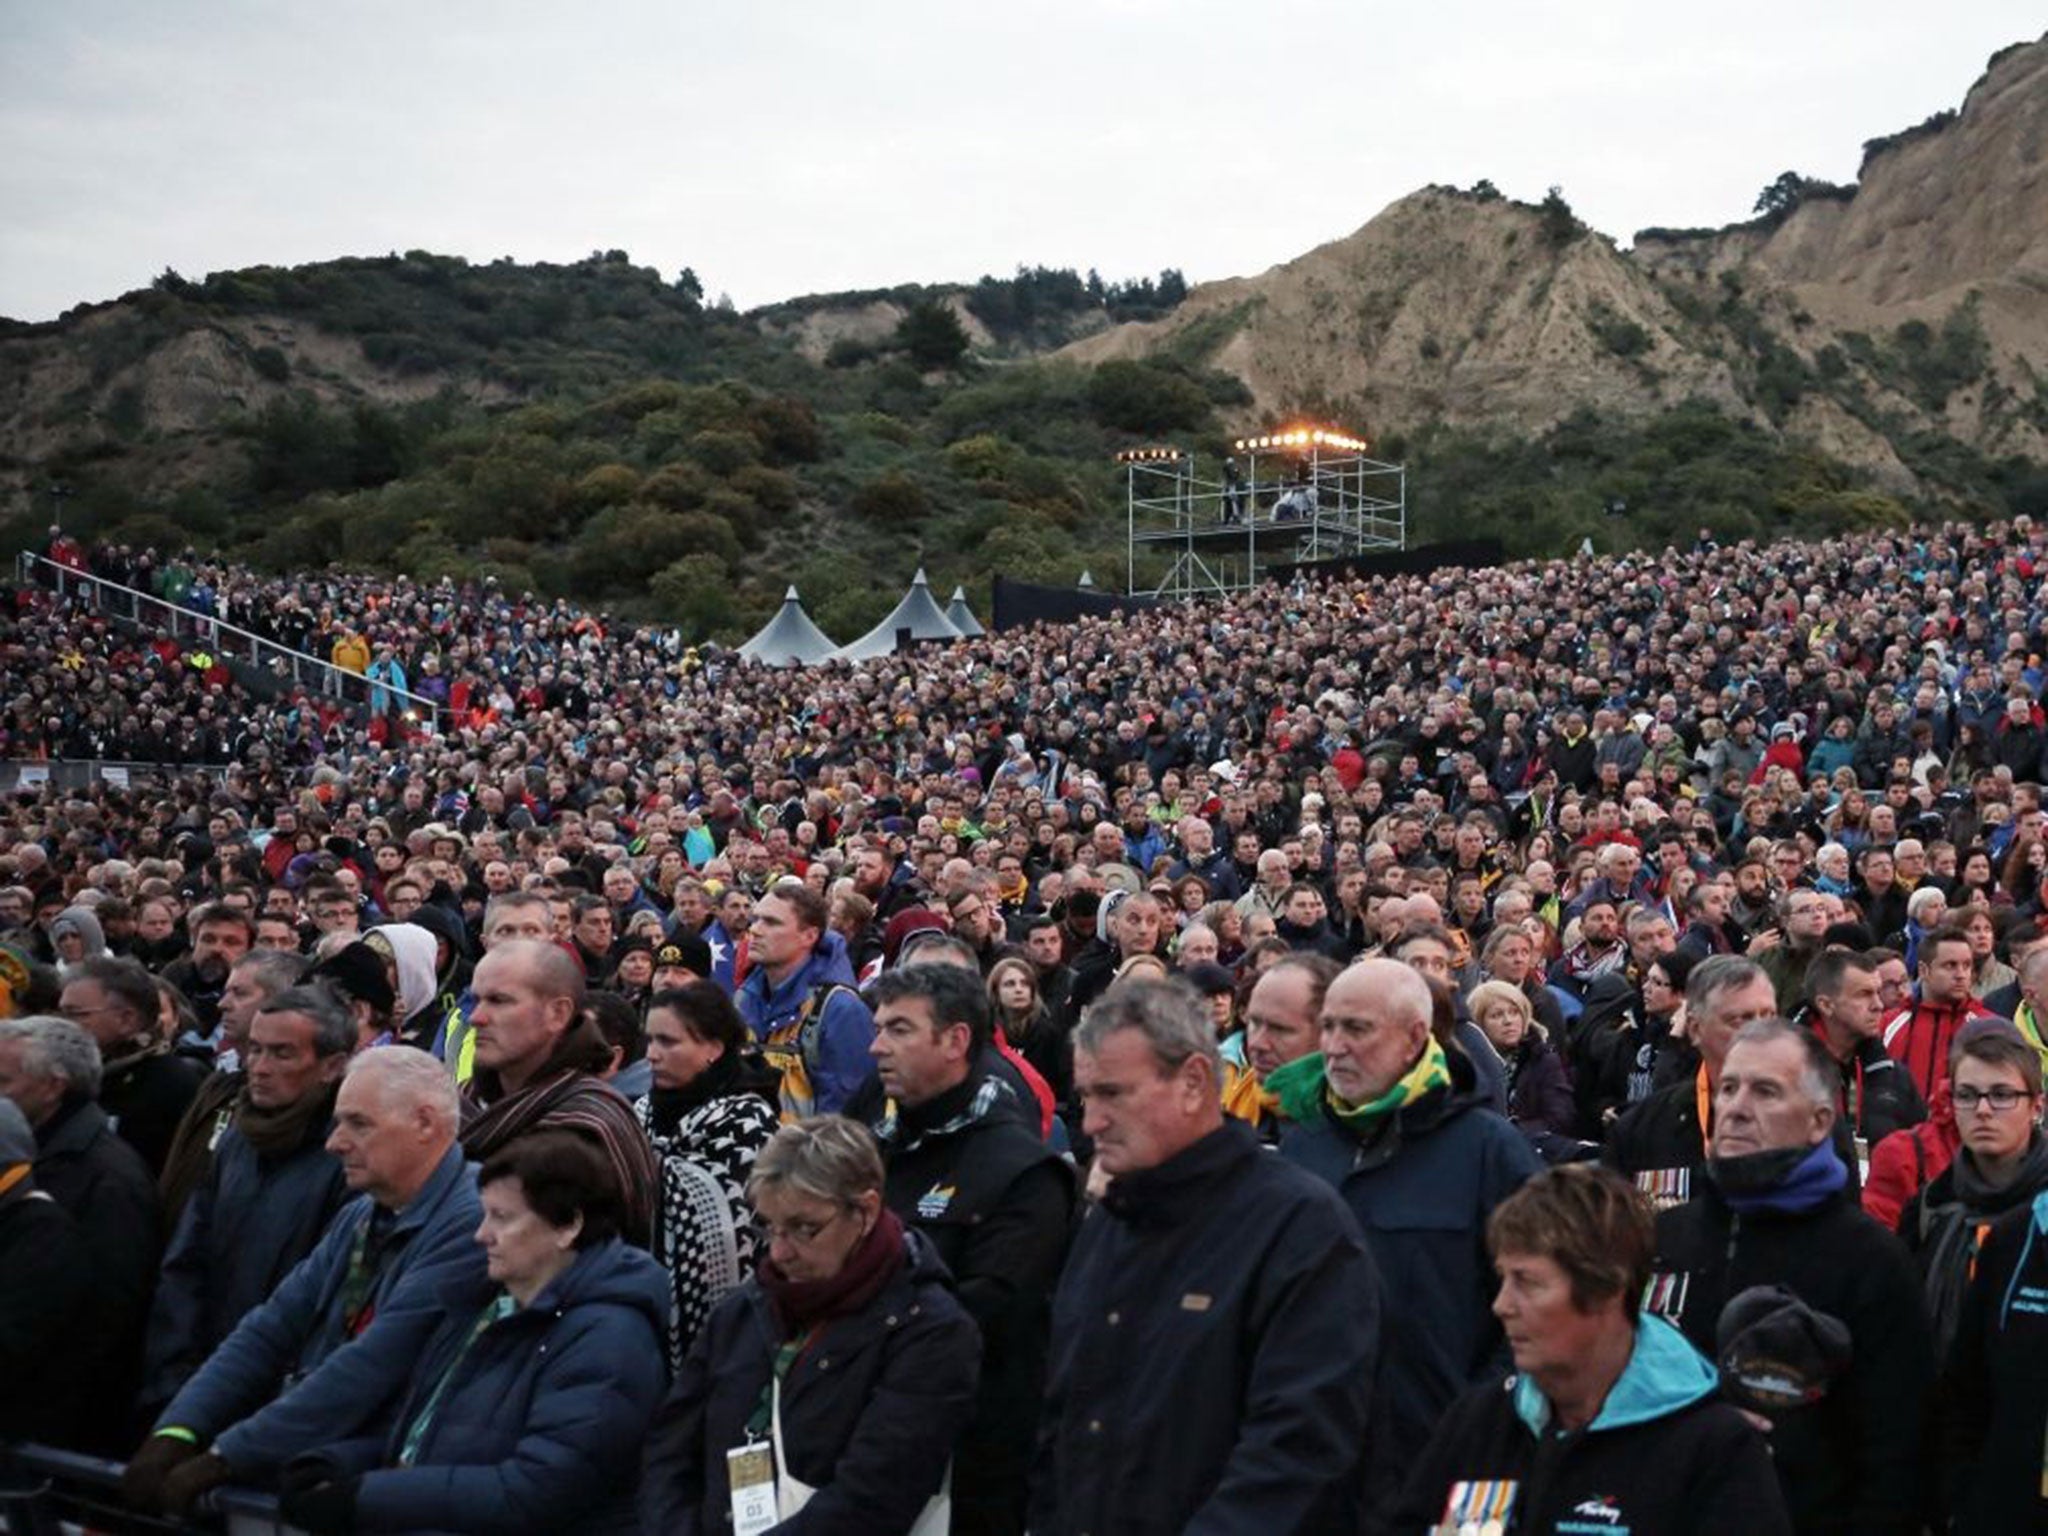 Visitors from Australia and New Zealand attend a dawn ceremony marking the 100th anniversary of the Battle of Gallipoli, at Anzac Cove on April 25